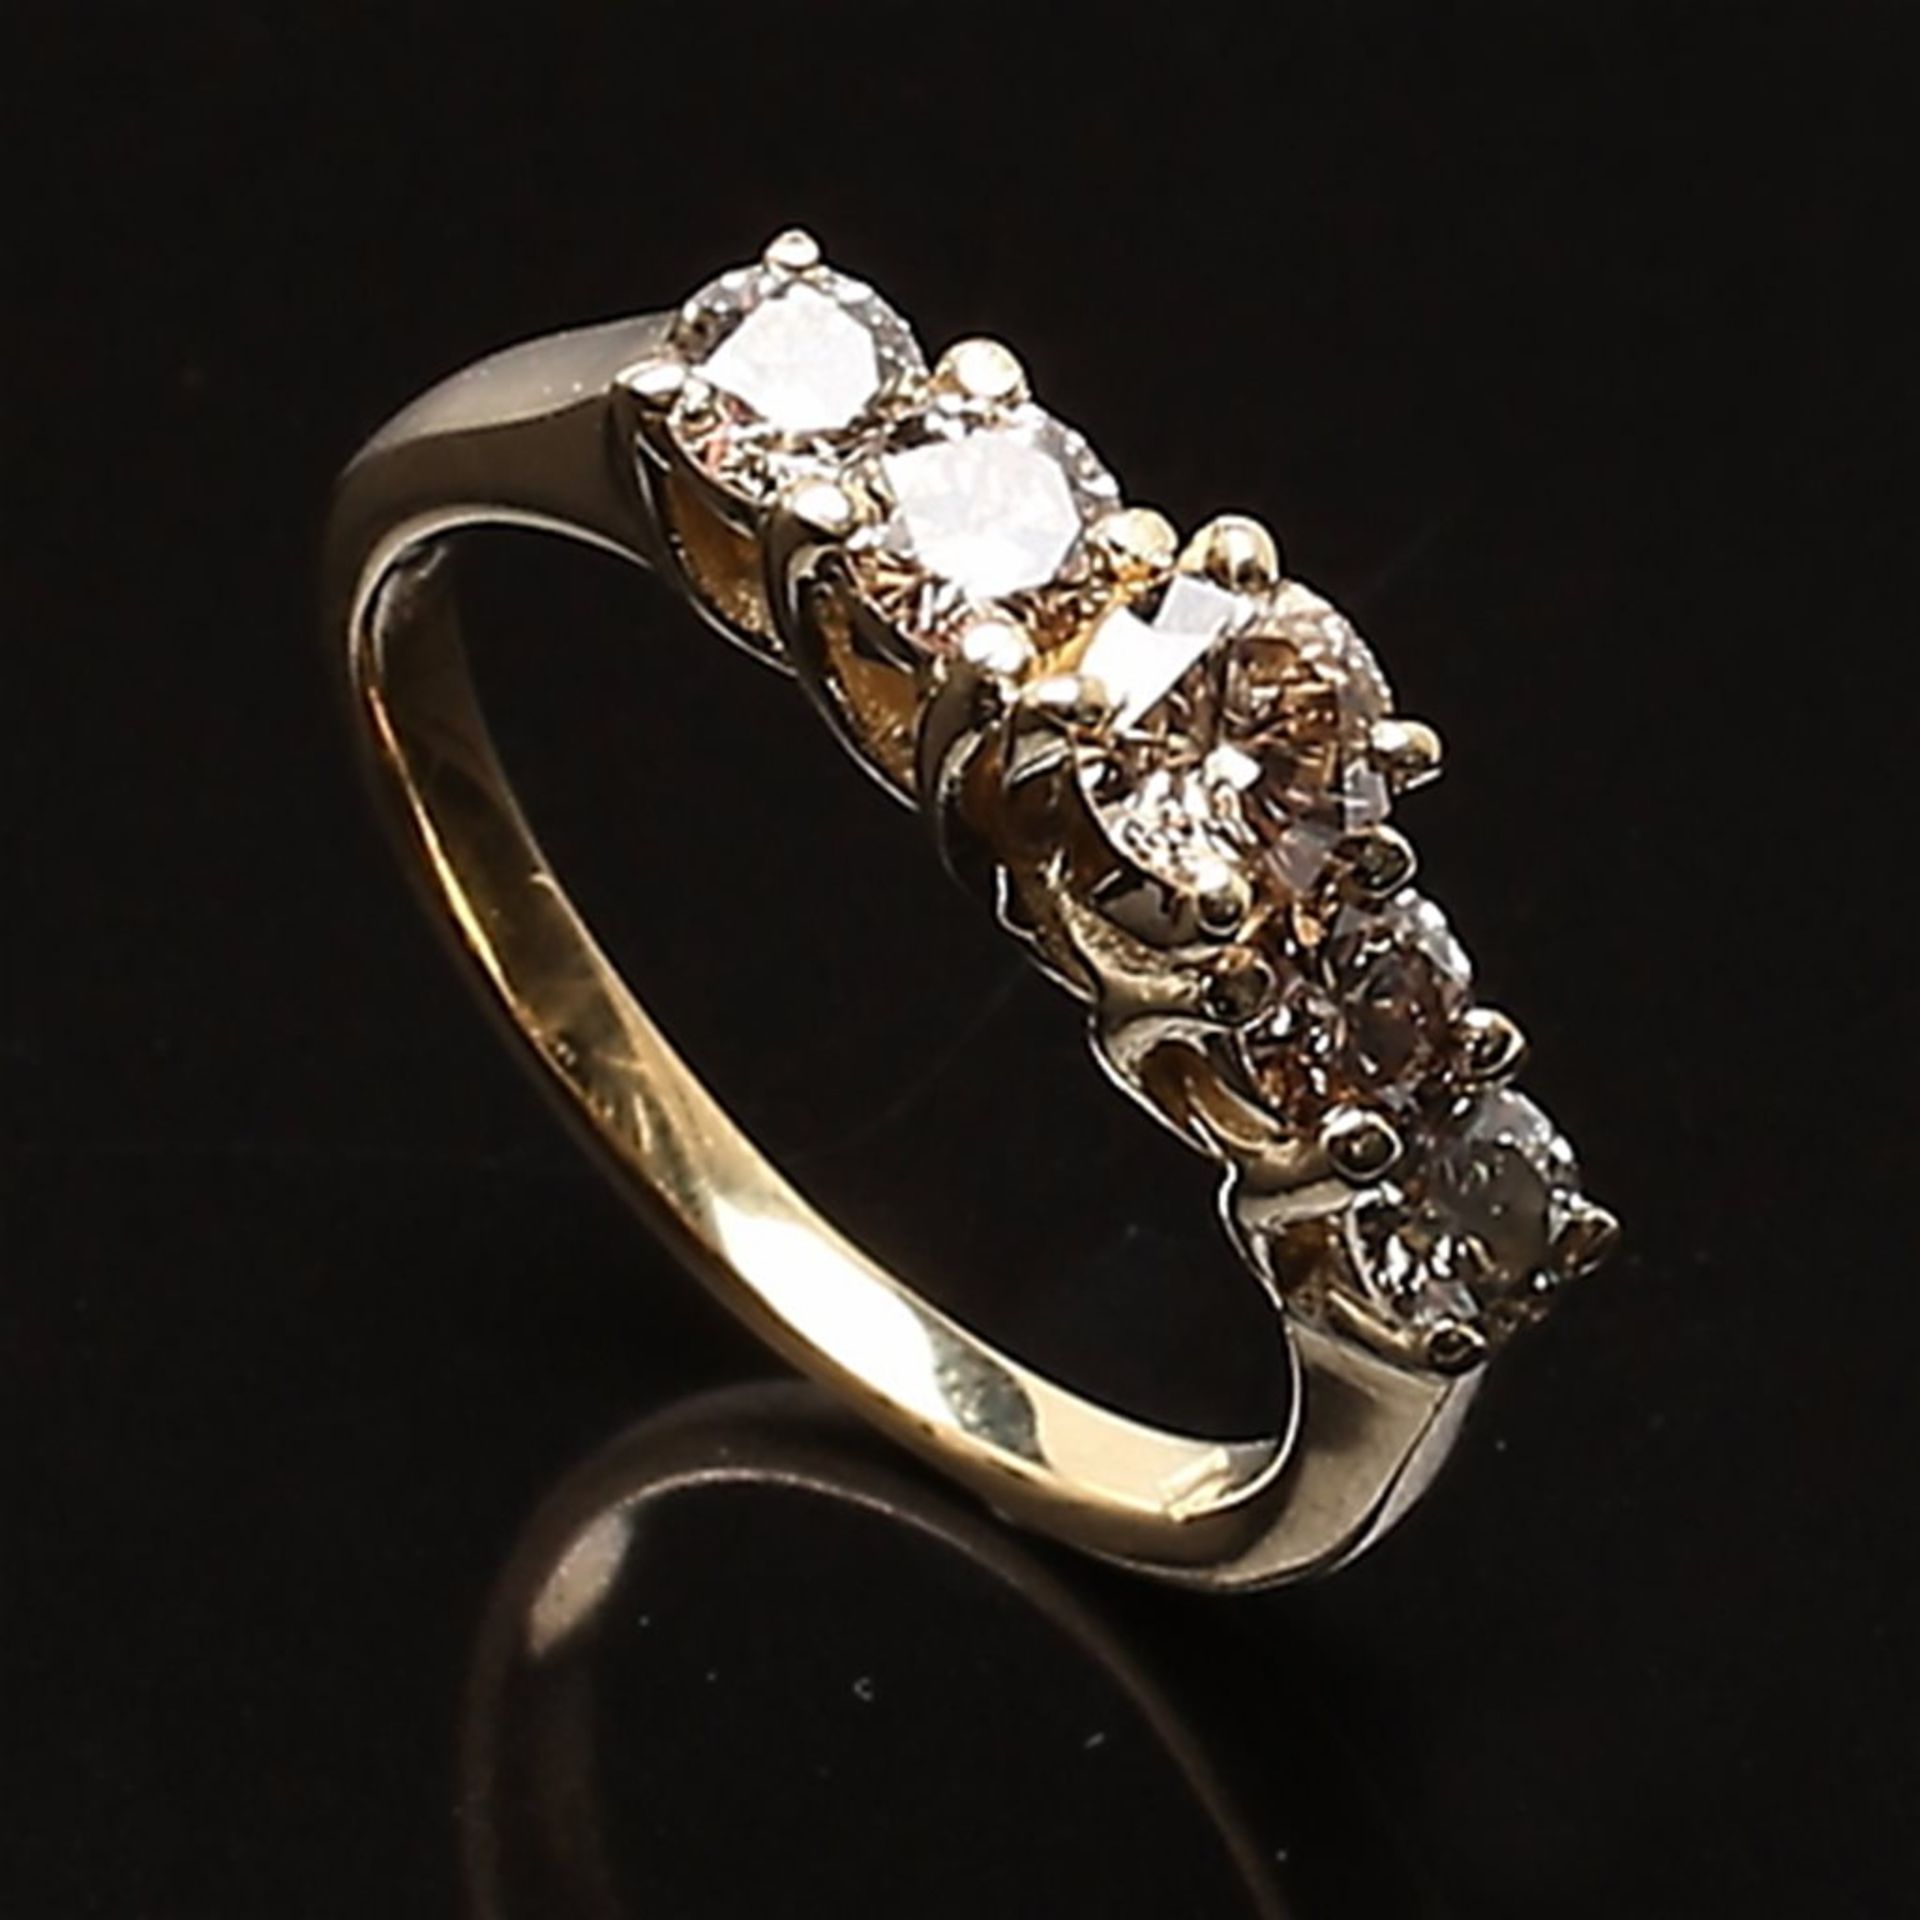 Ring in 14K yellow gold with 5 brilliant cut diamonds